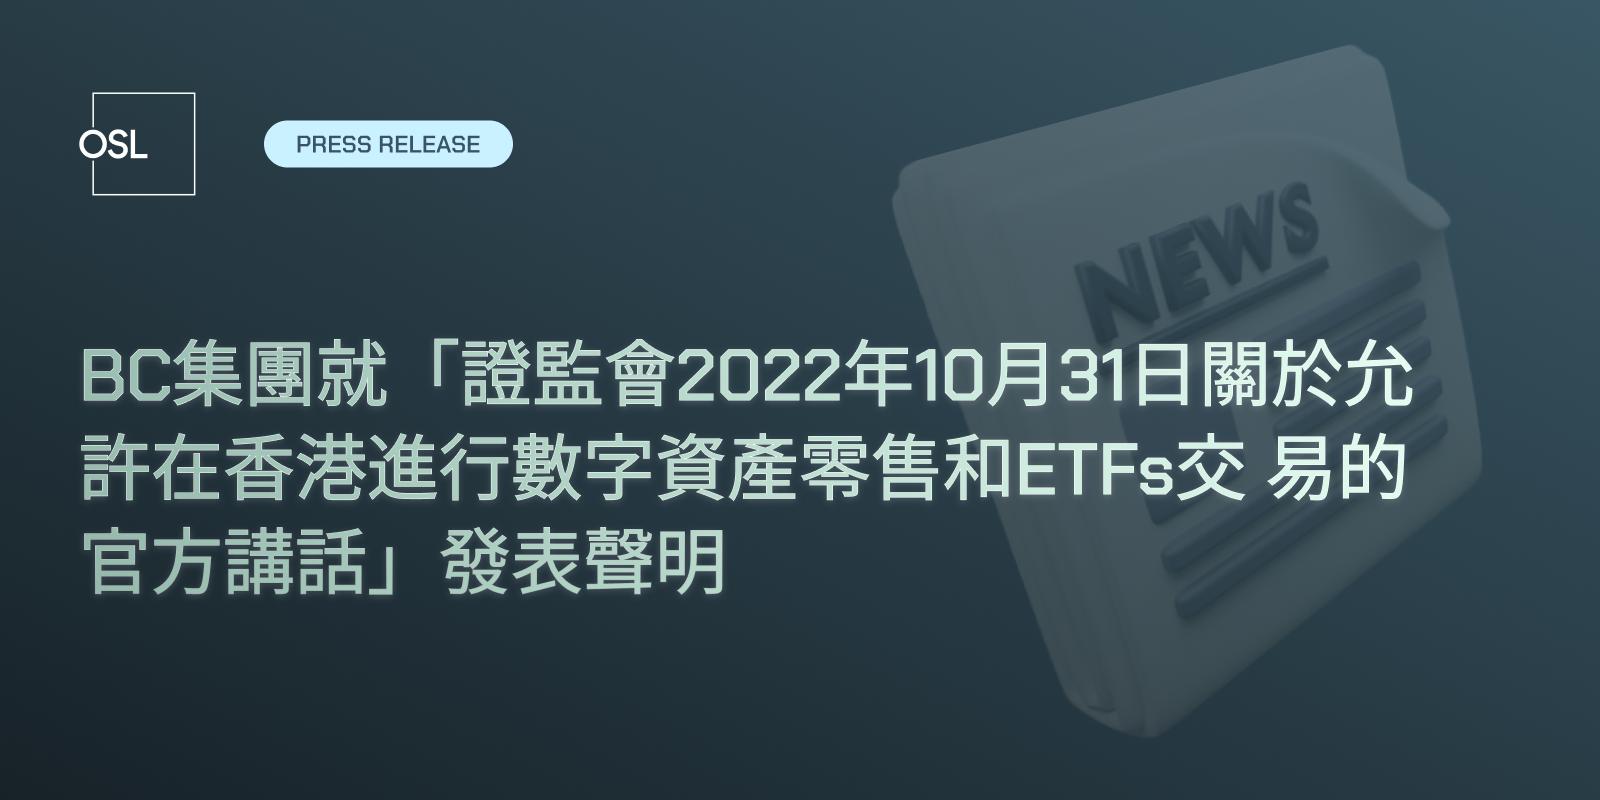 BC Group Statement on the SFC’s 31 October 2022 Speech on Allowing Digital Asset Retail Trading and ETFs in Hong Kong